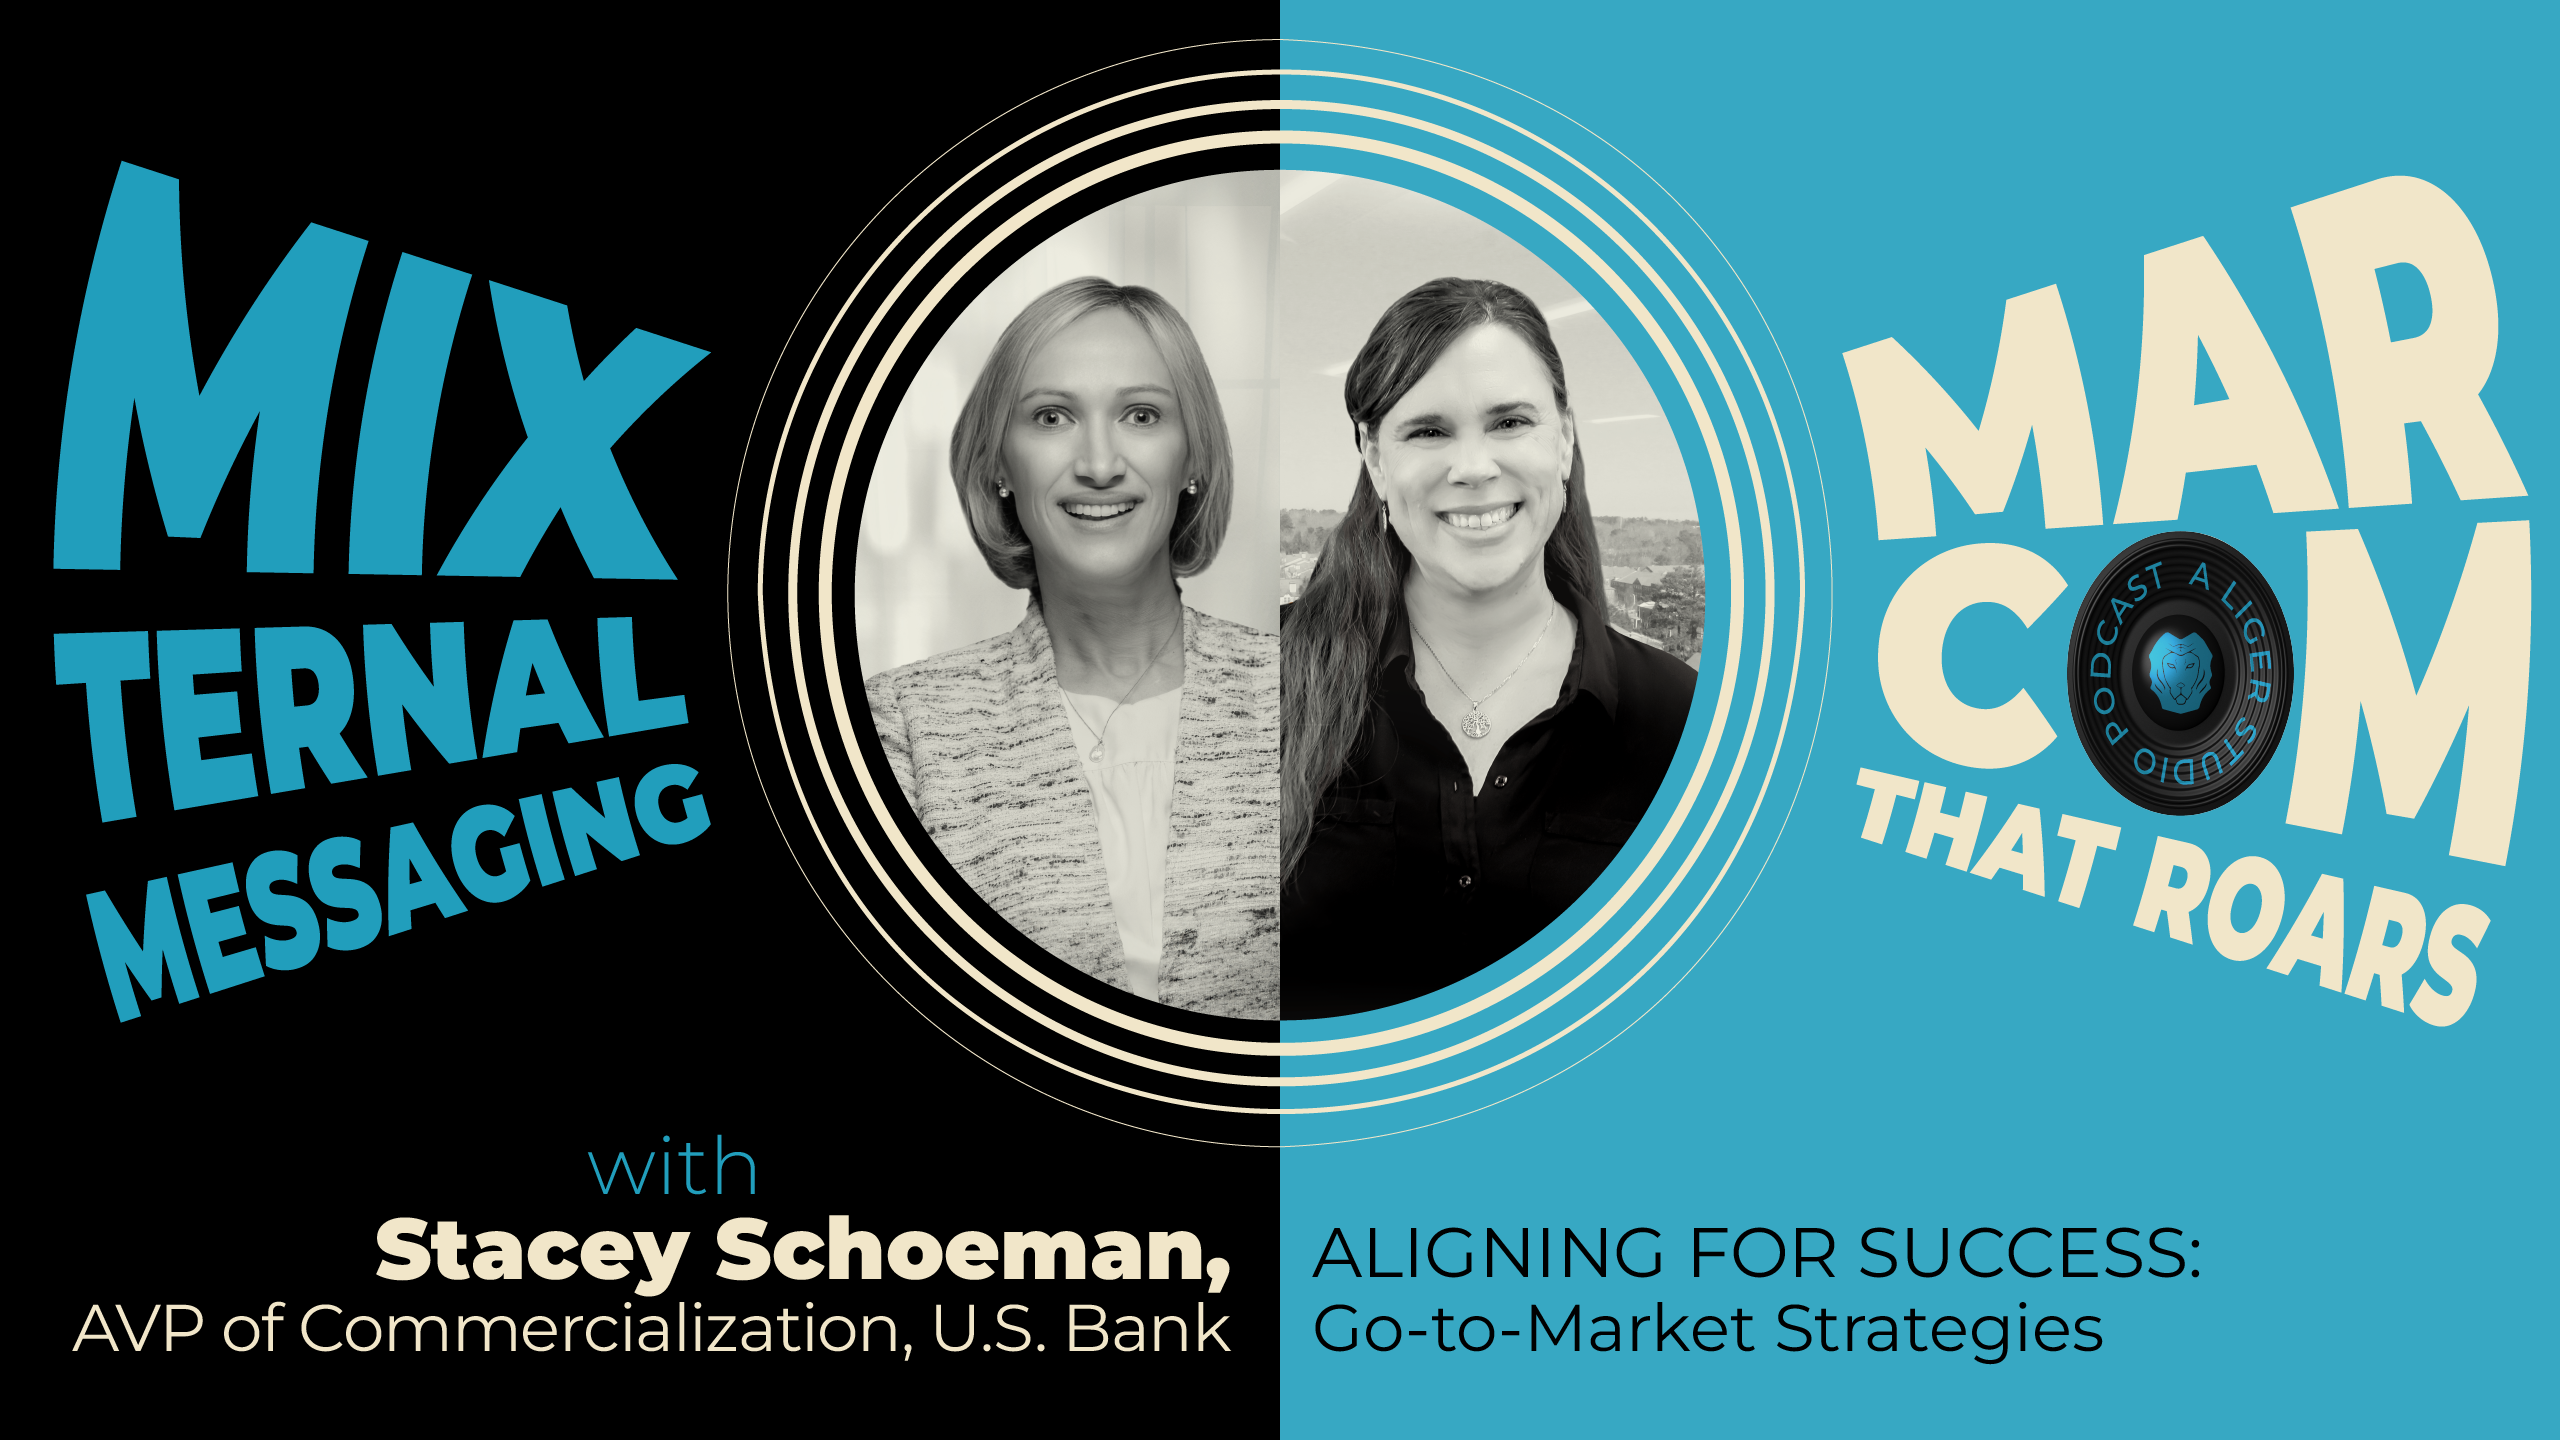 Aligning for Success: Go-to-Market Strategies with Stacey Schoeman